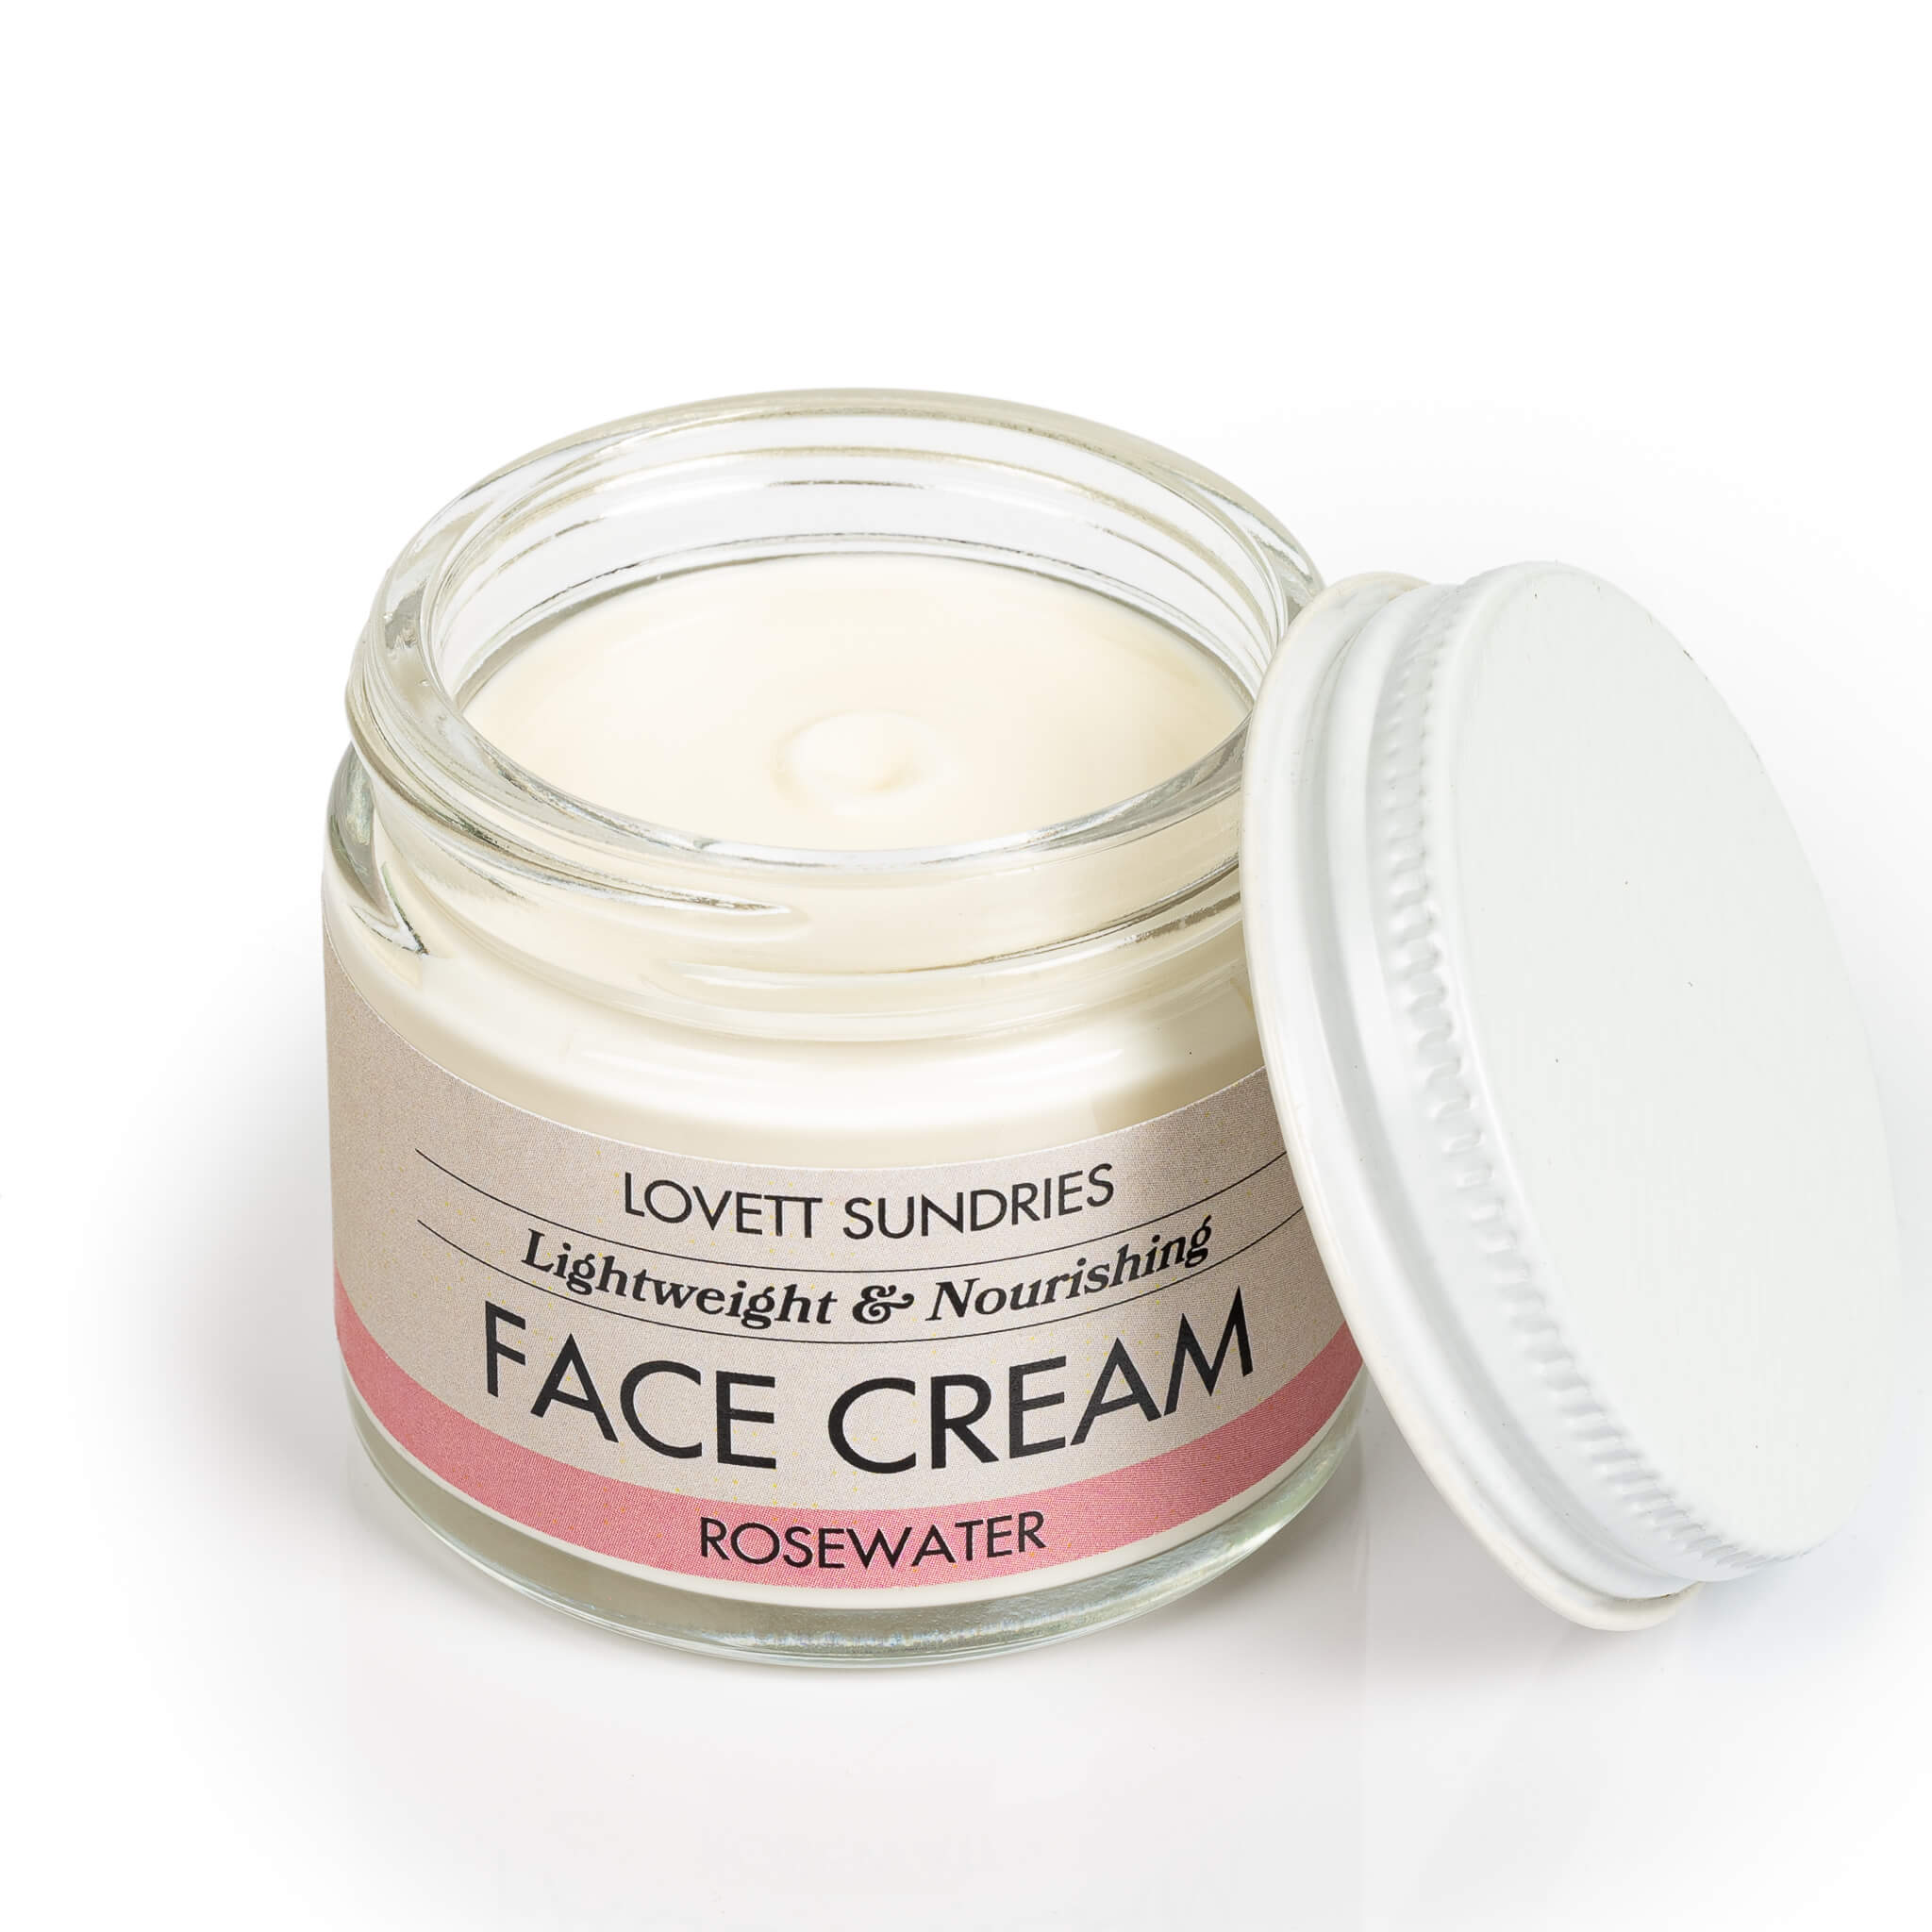 All natural creamy lightweight and nourishing Rosewater Face Cream in a glass jar.